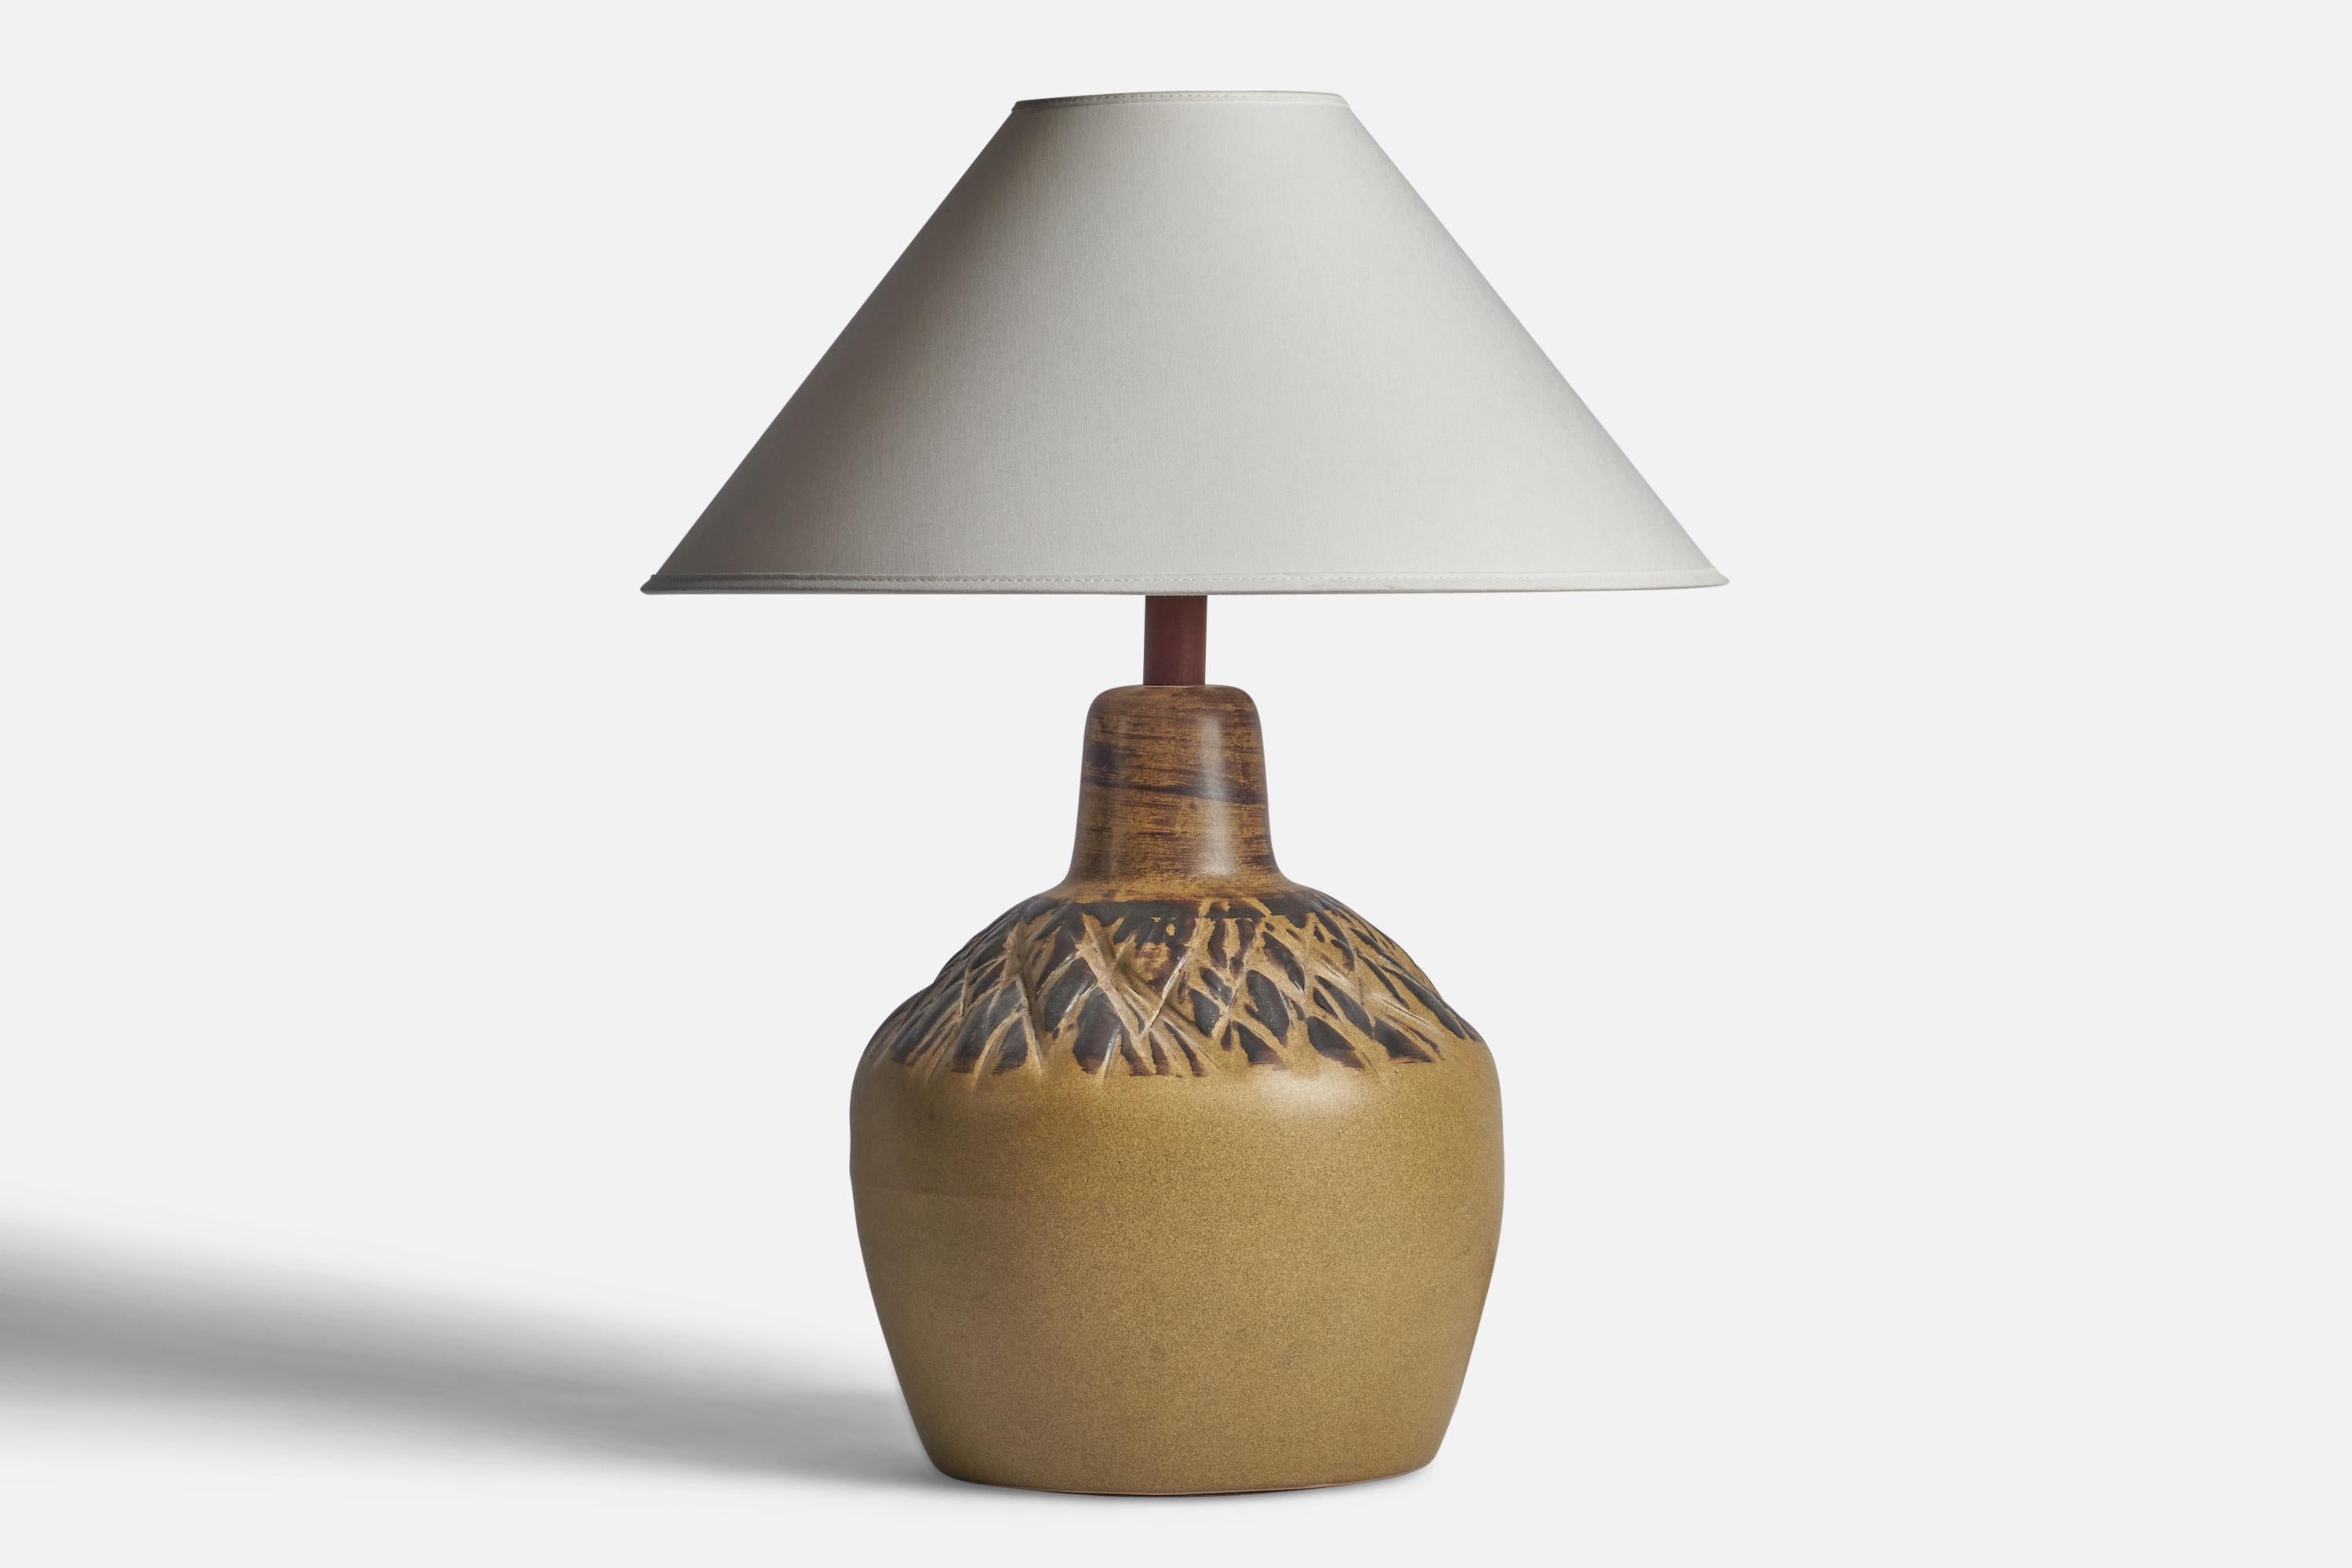 A beige and black-glazed ceramic and walnut table lamp designed by Jane & Gordon Martz and produced by Marshall Studios, USA, 1960s.

Dimensions of Lamp (inches): 16” H x 9.2” Diameter
Dimensions of Shade (inches): 4.5” Top Diameter x 16” Bottom